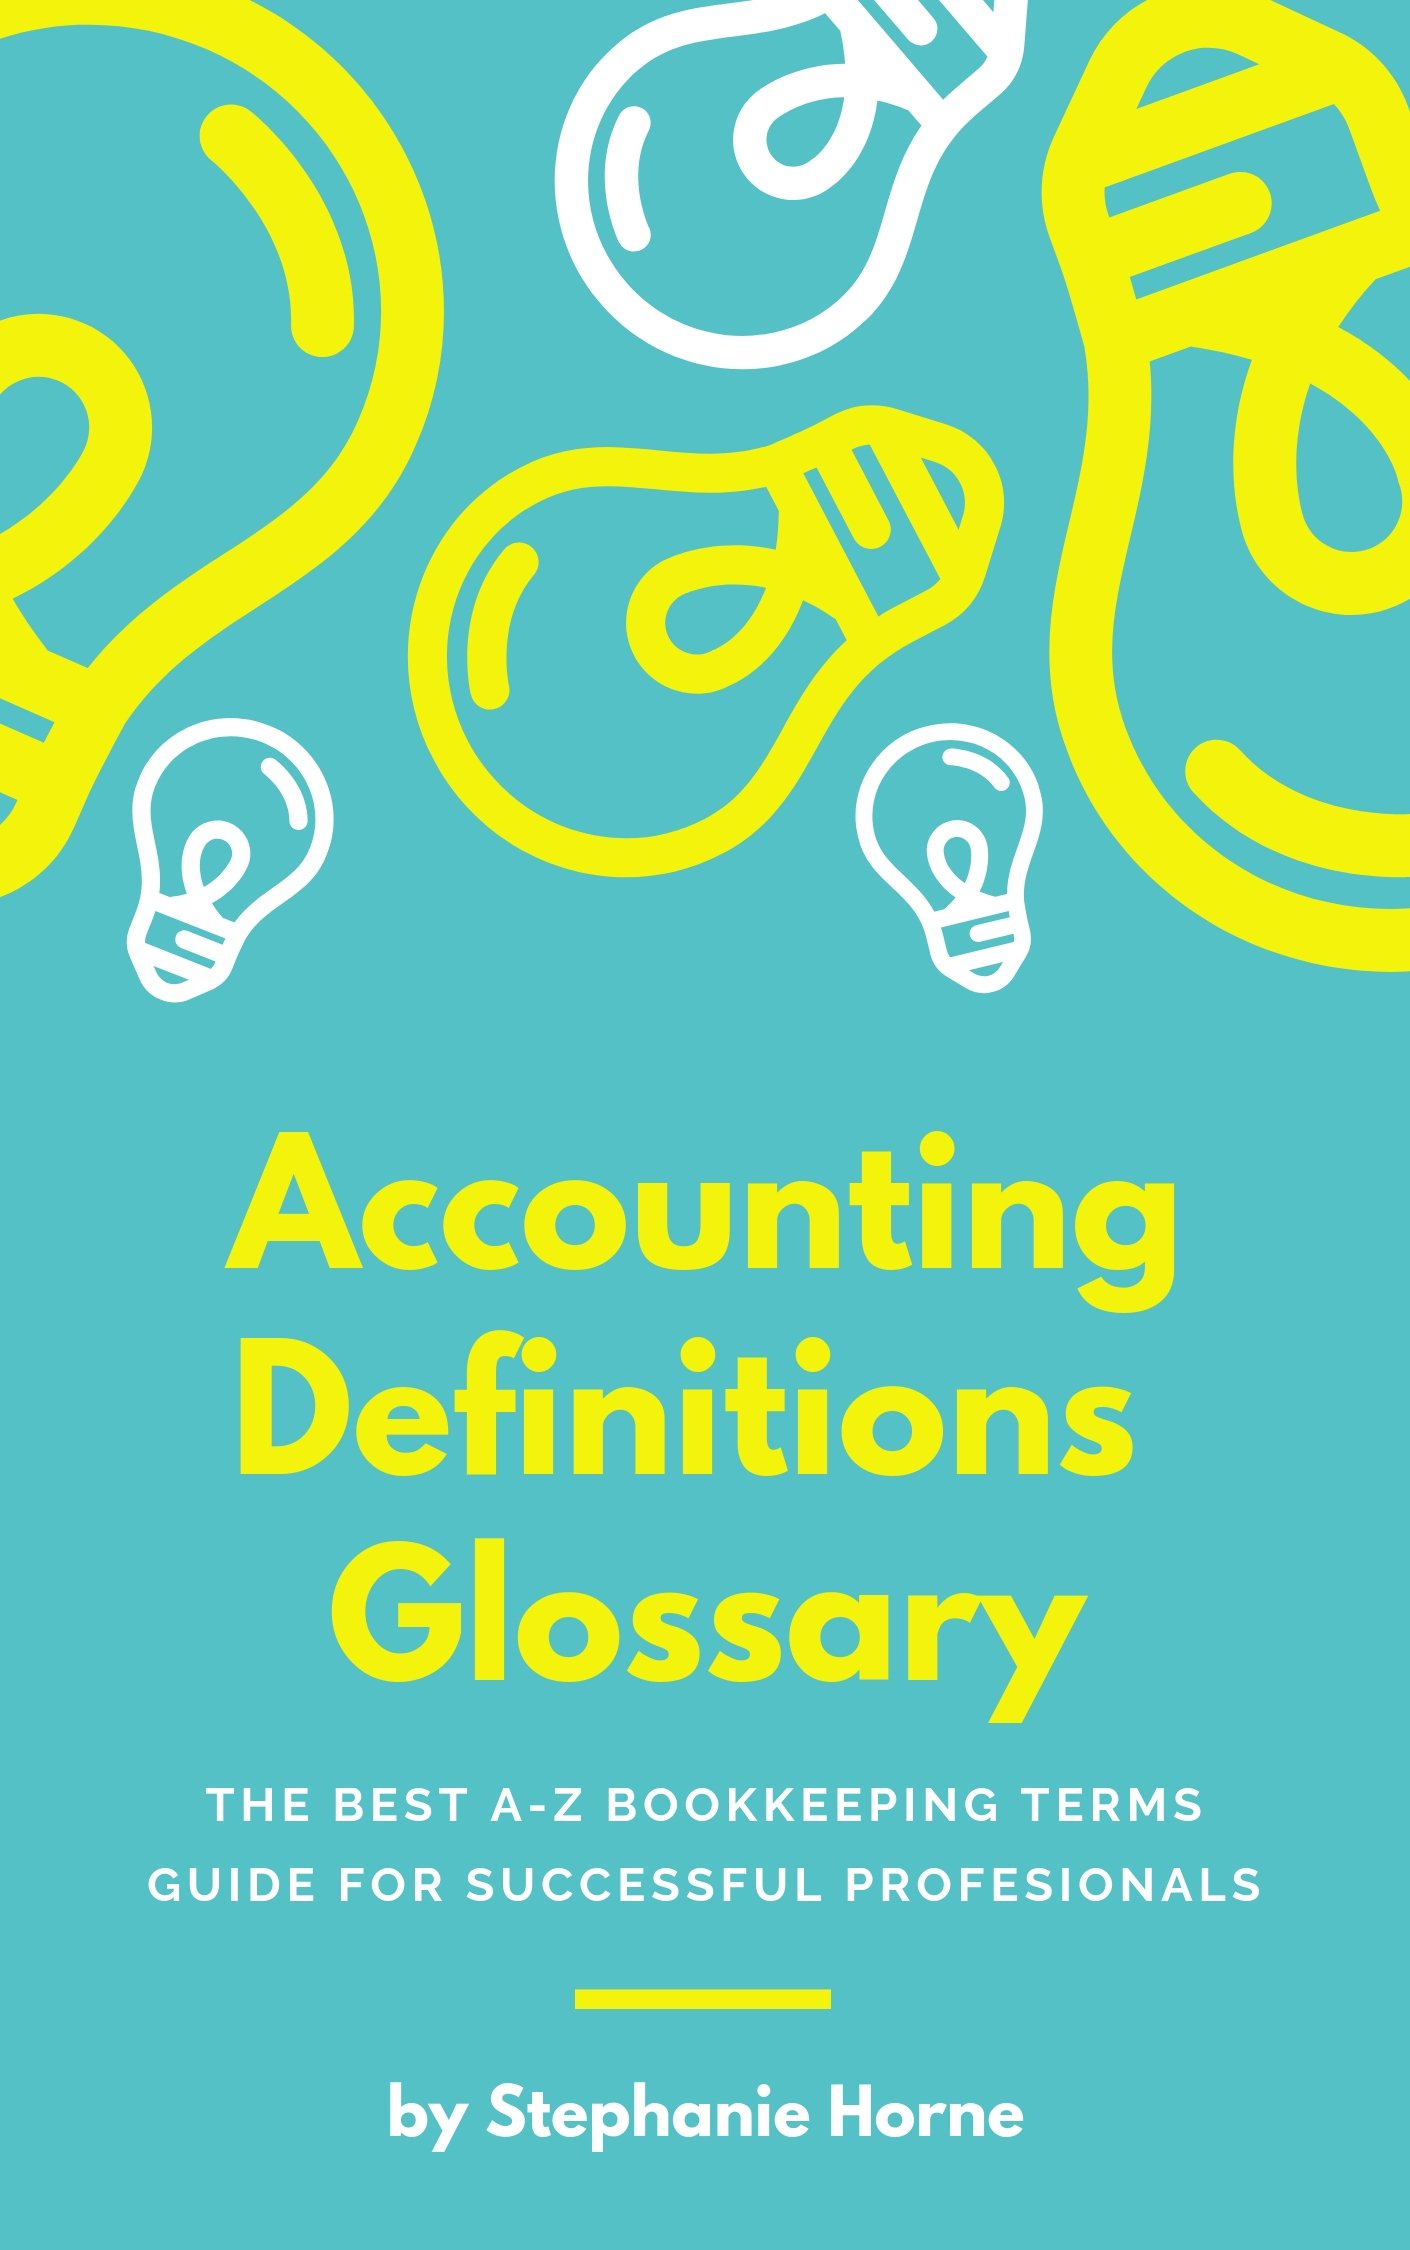 Accounting Definitions Glossary